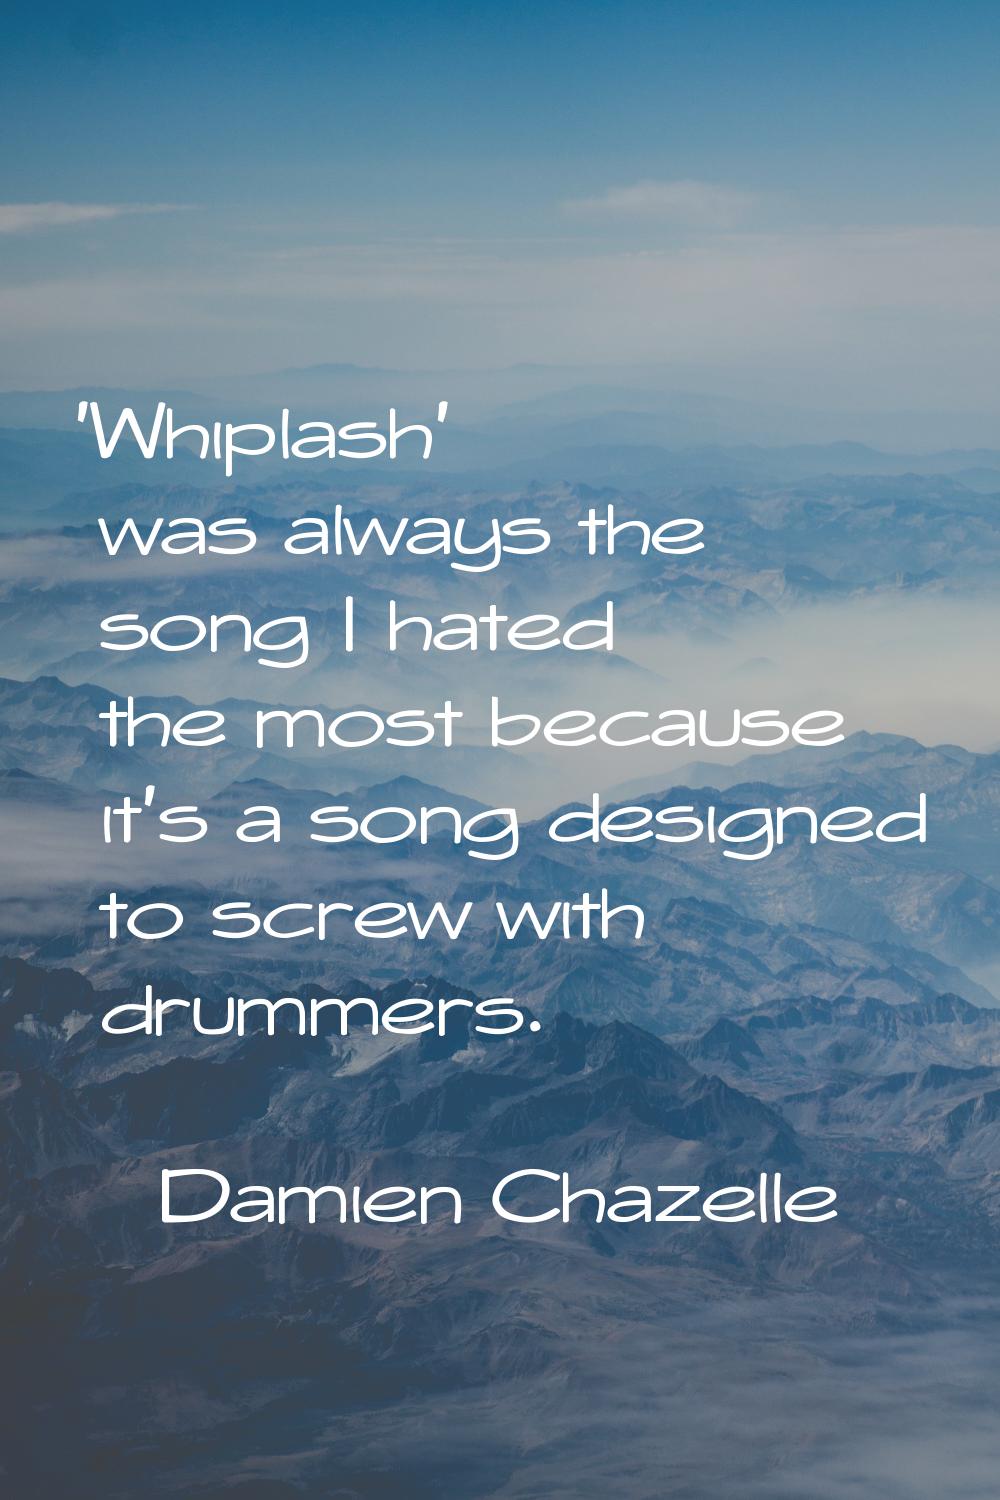 'Whiplash' was always the song I hated the most because it's a song designed to screw with drummers